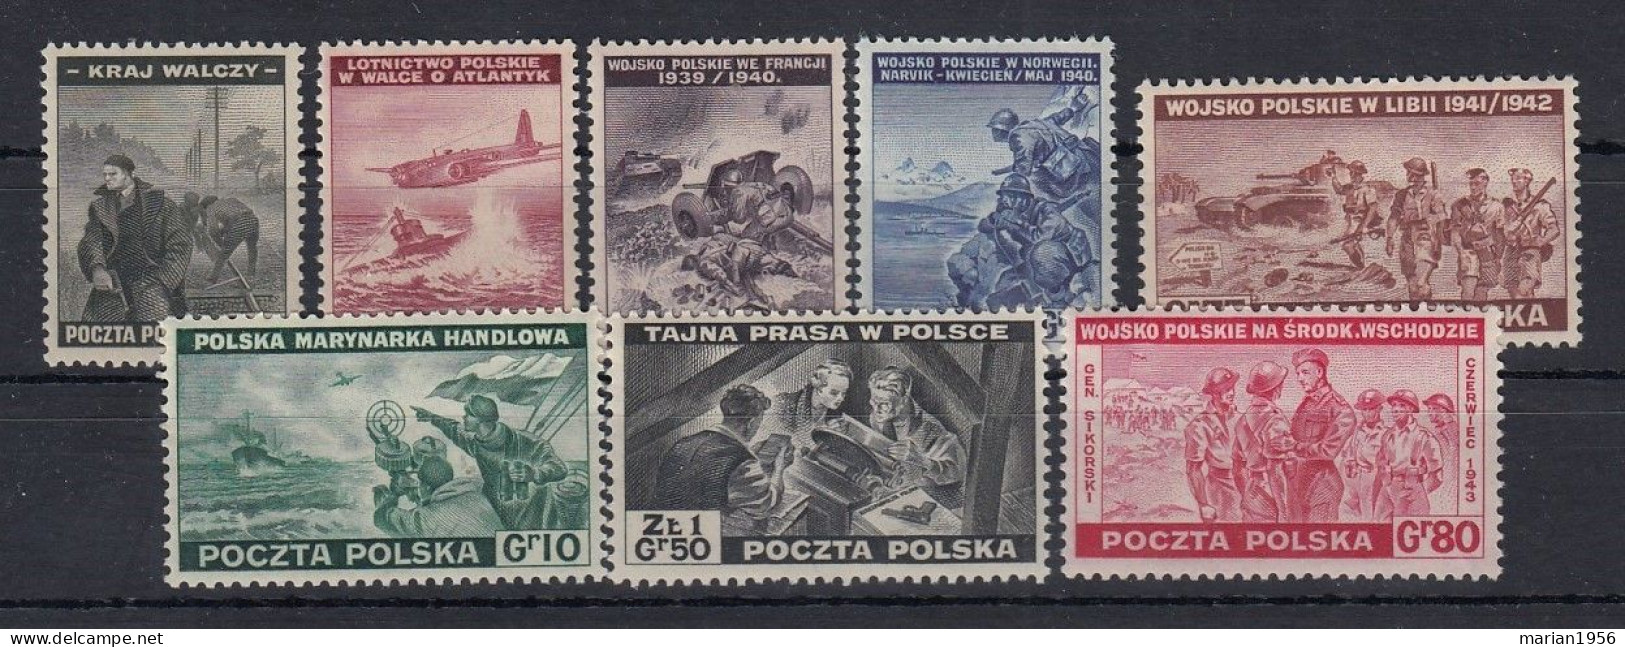 Pologne 1943 - Guerre - WWII - GOVERNMENT In EXILE (LONDON) - ARMEE POLONAISE -Mich. 368/75 - MNH - Government In Exile In London